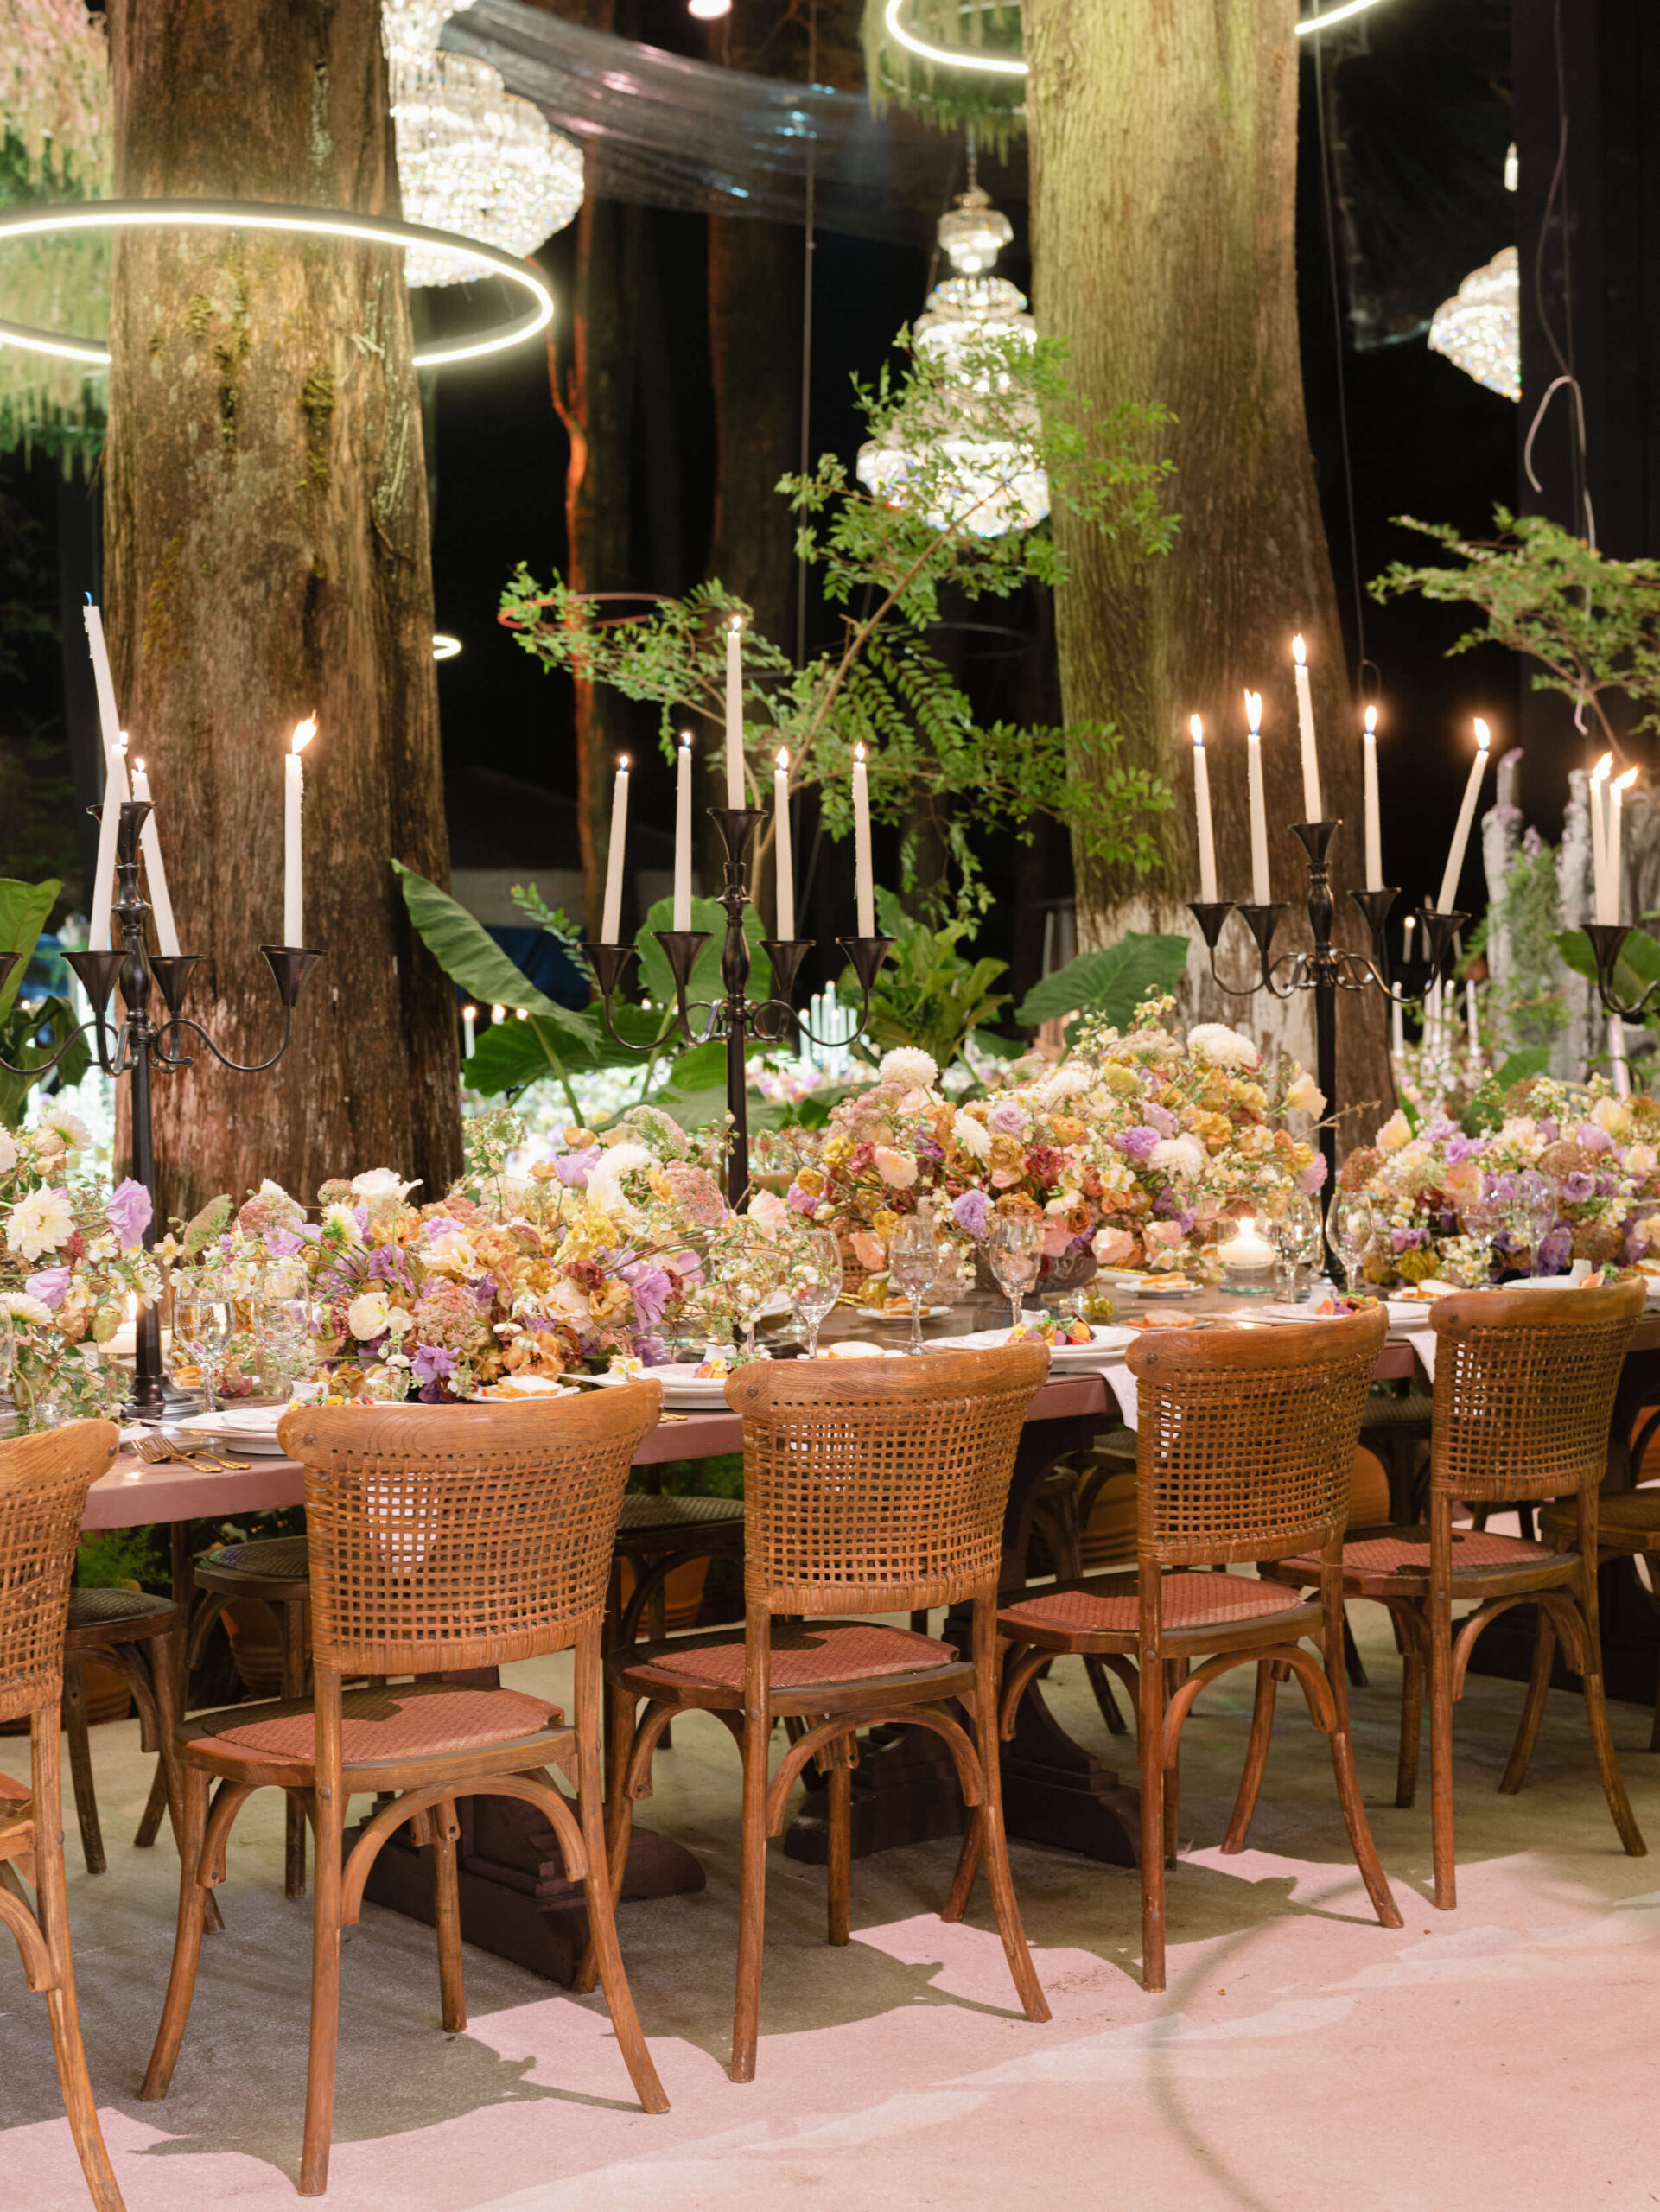 Reception design details; candelabras, flowers, chandeliers, and halo lights around the trees